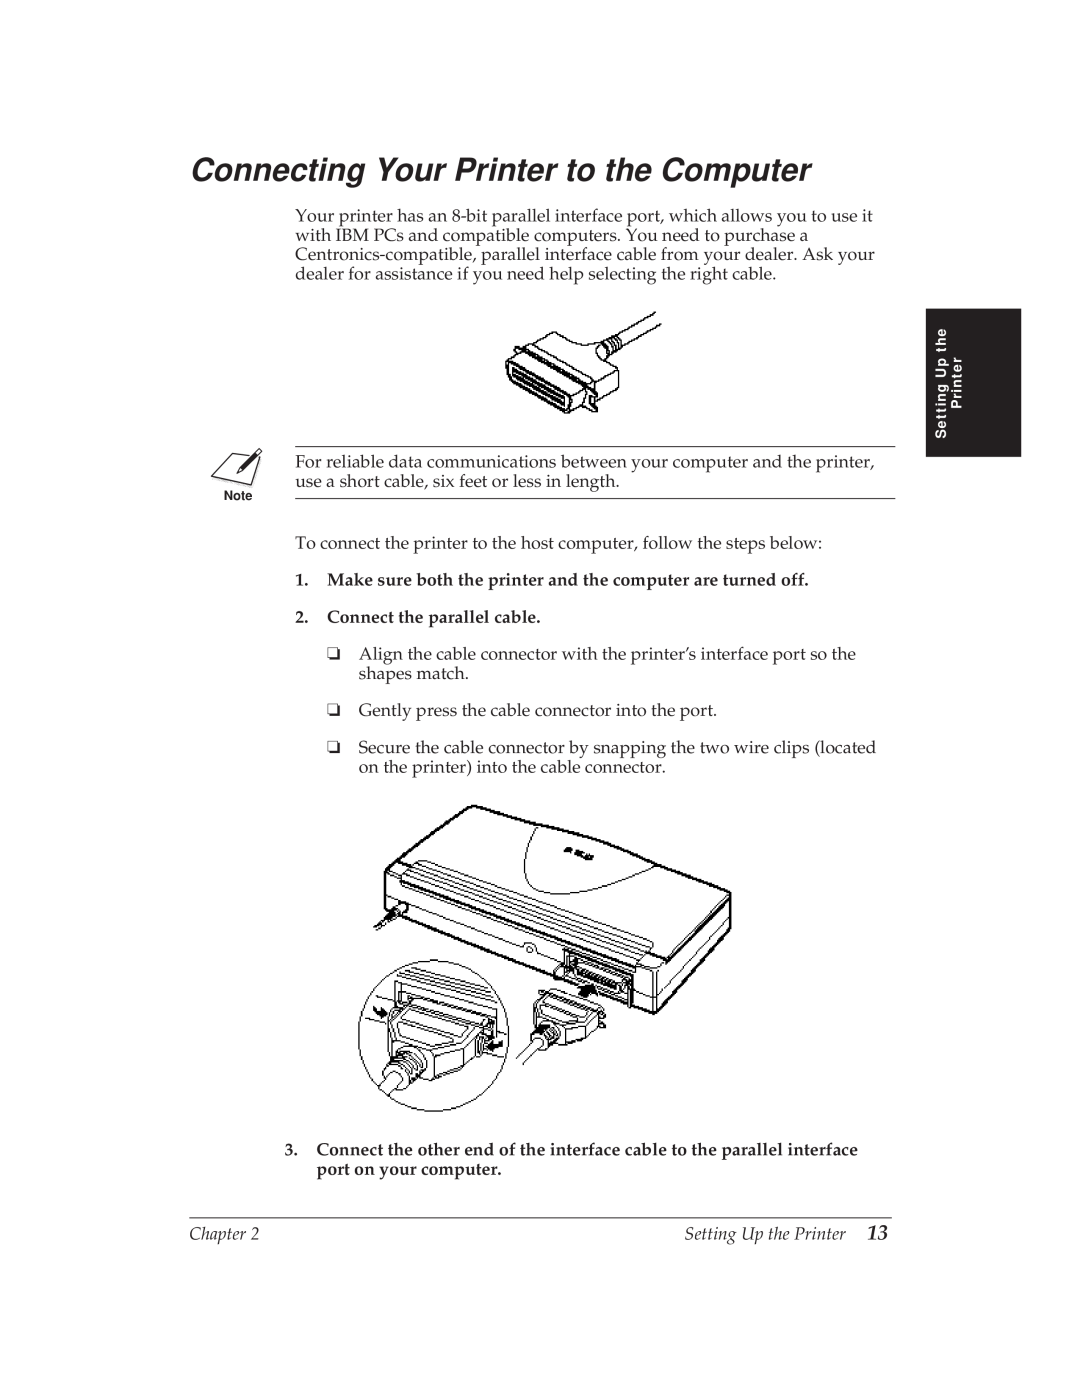 Canon BJ-30 manual Connecting Your Printer to the Computer, Make sure both the printer and the computer are turned off 